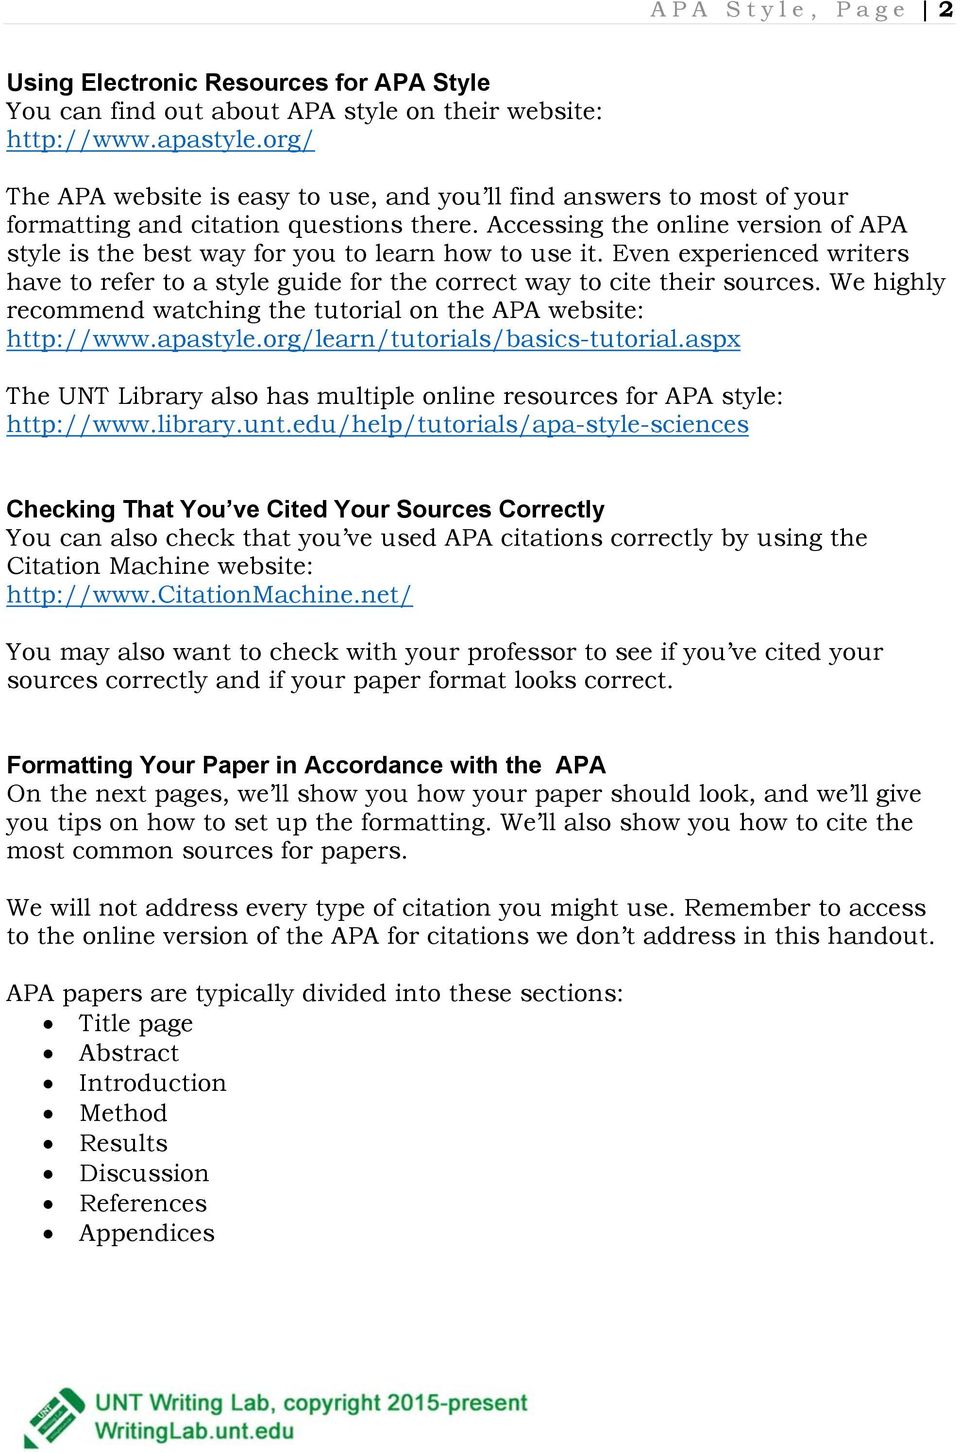 Accessing the online version of APA style is the best way for you to learn how to use it. Even experienced writers have to refer to a style guide for the correct way to cite their sources.